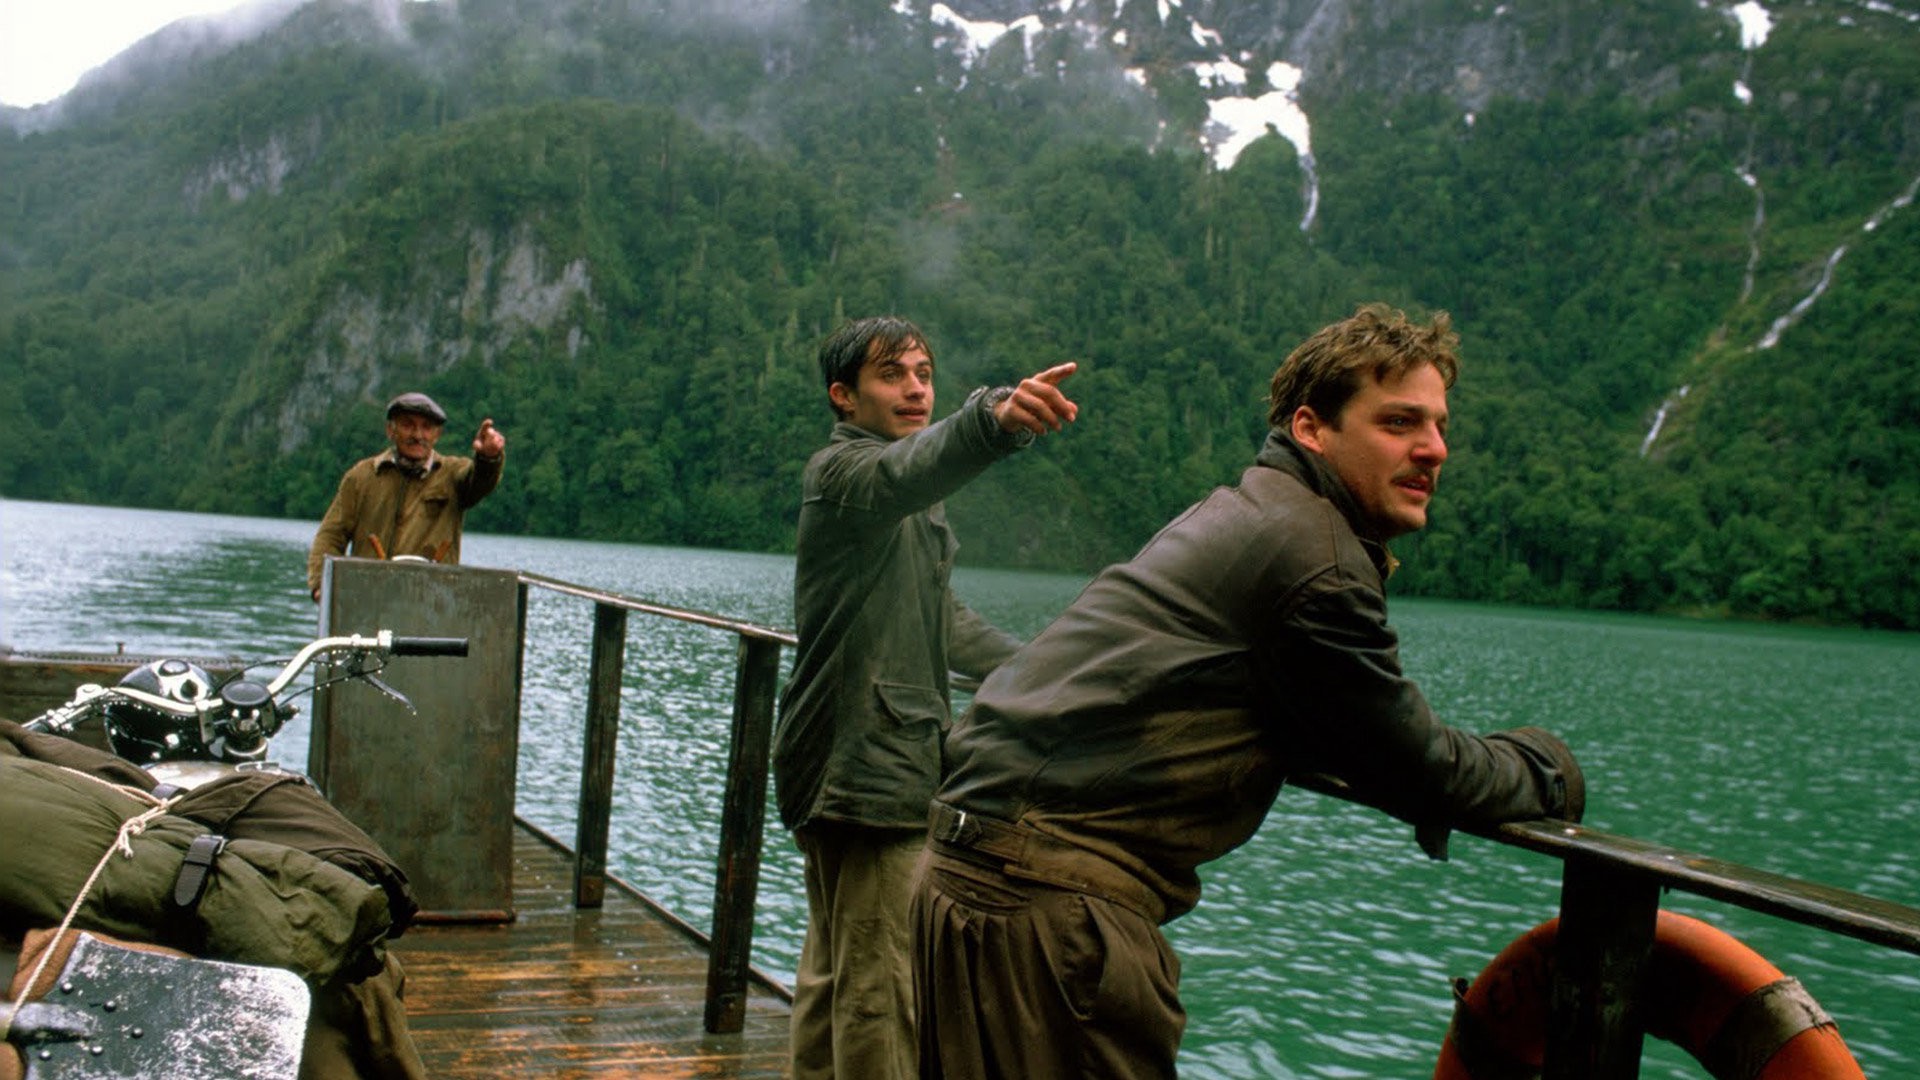 Three men ride down the river on a ferry. Two of the men are pointing to the right of the frame.